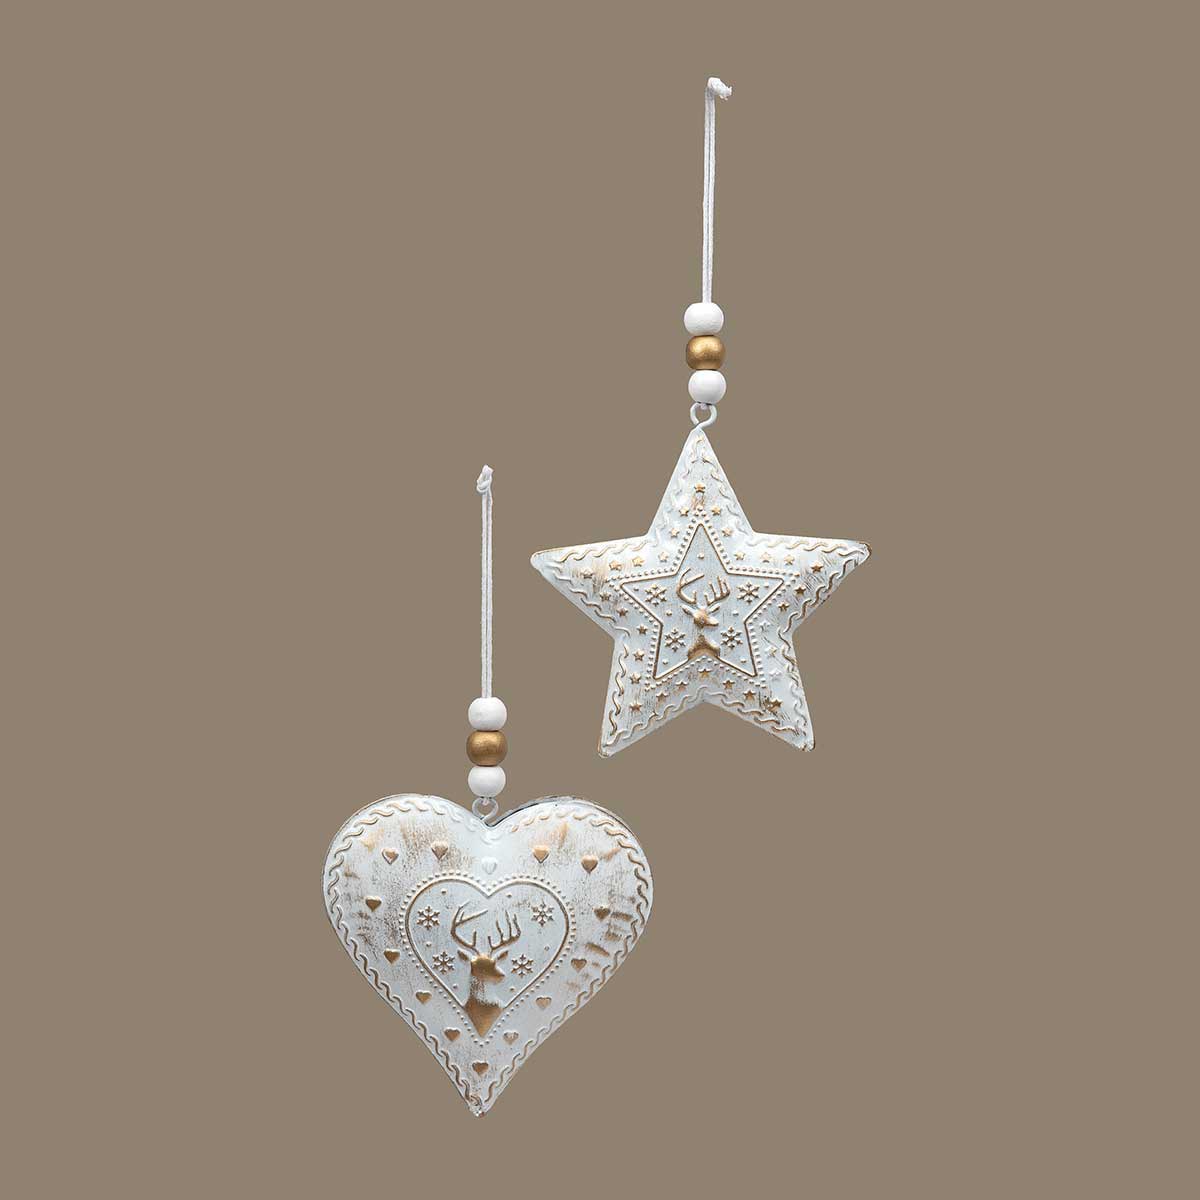 ORNAMENT STAR/HEART 2 ASSORTED 3.5IN X .5IN X 3.5IN/3.75IN WHITE - Click Image to Close